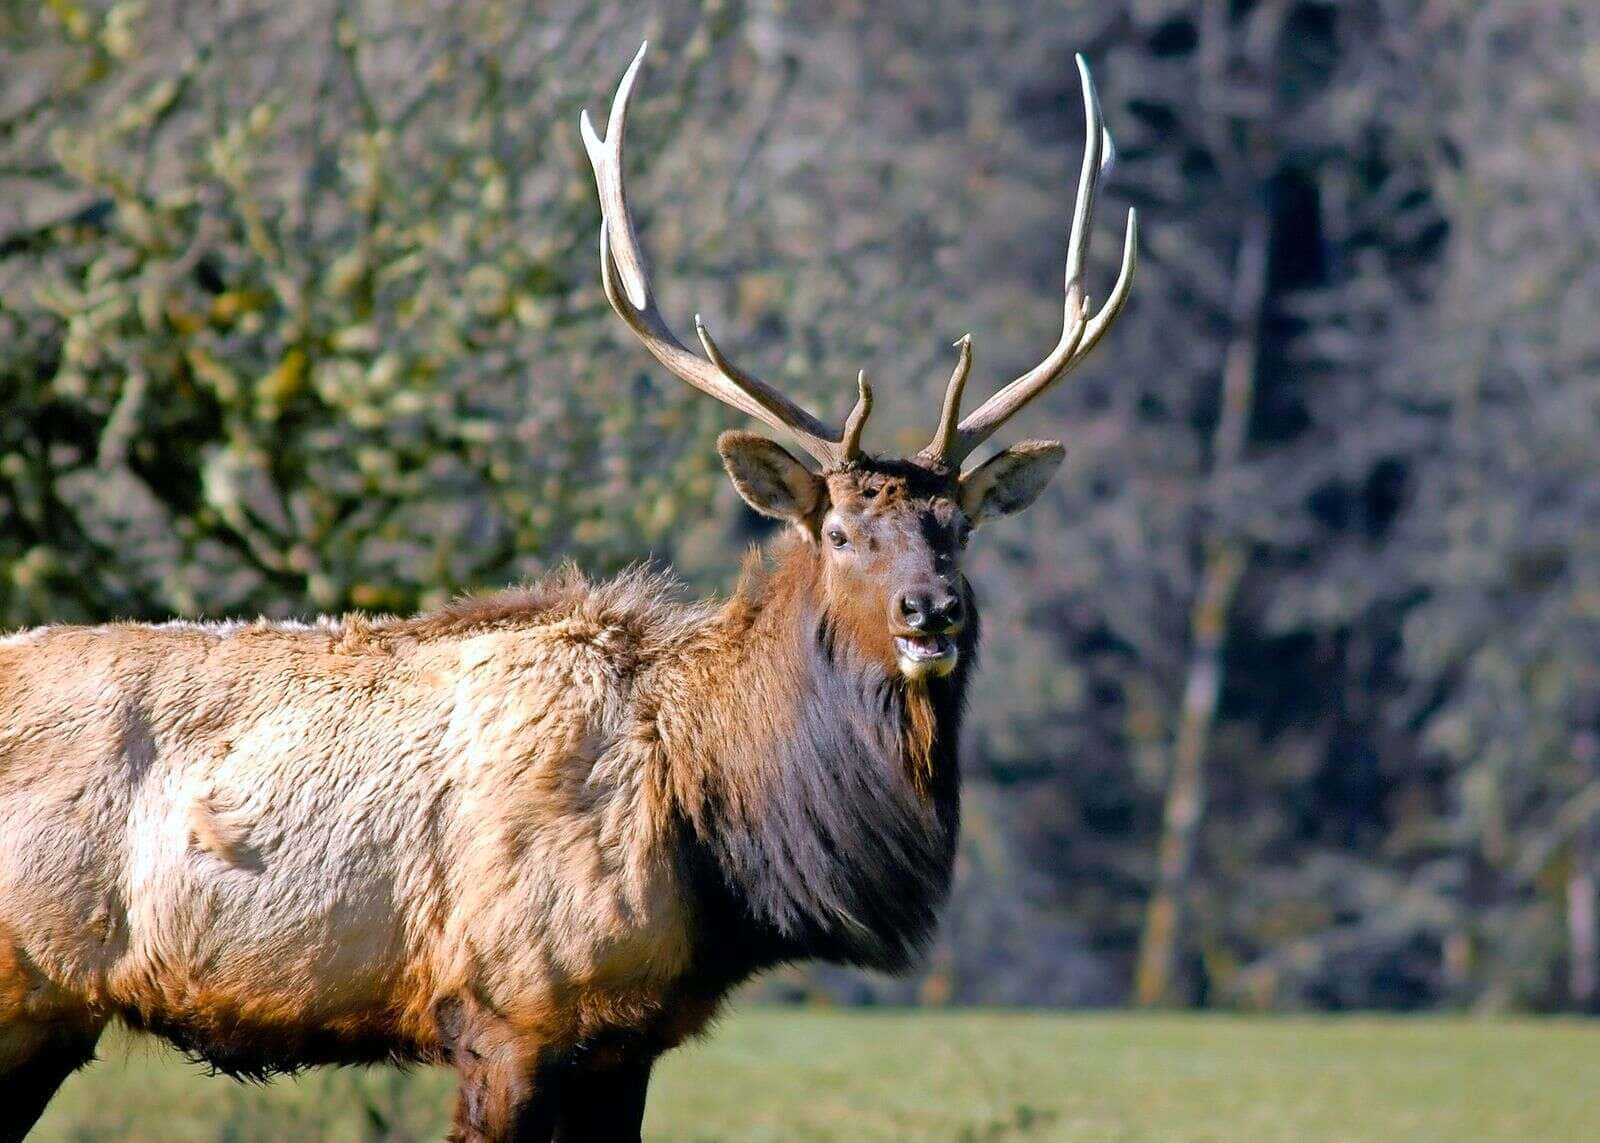 A magnificent elk stands tall in the wilderness